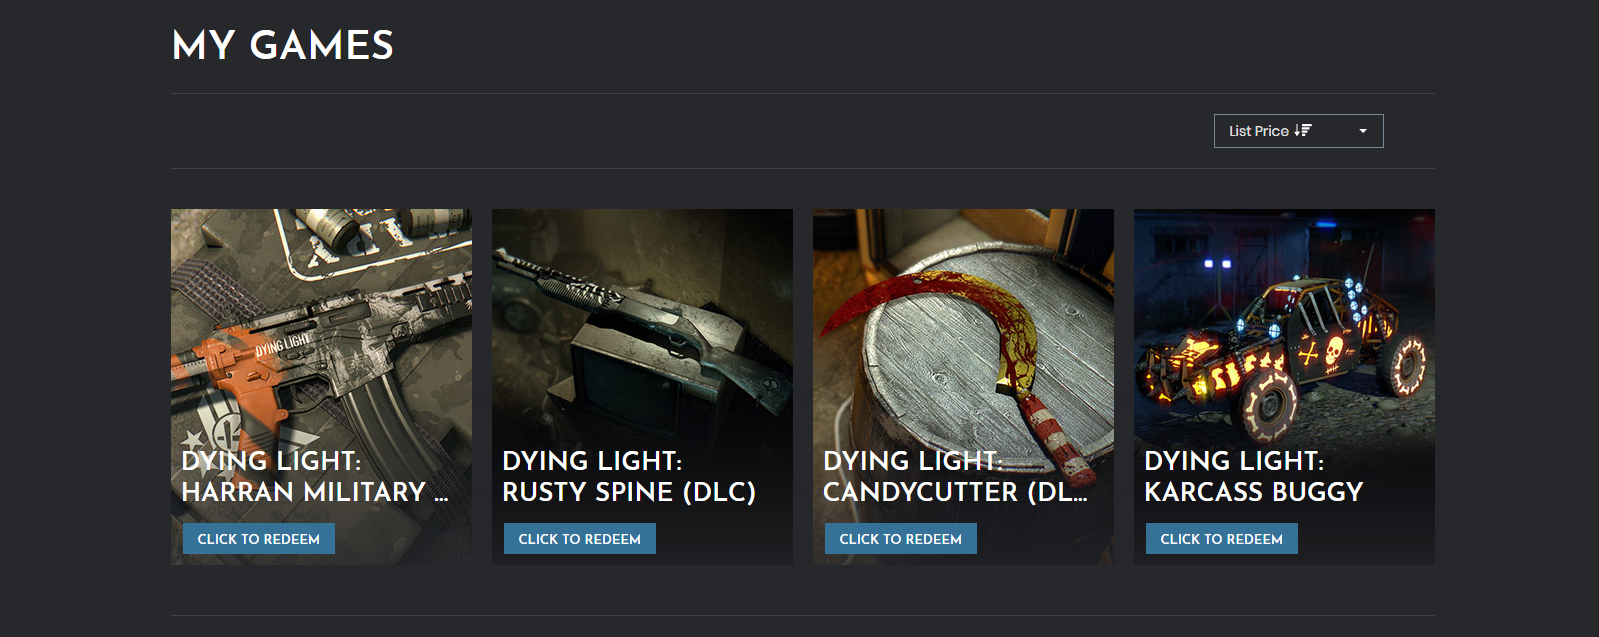 dying light items.PNG